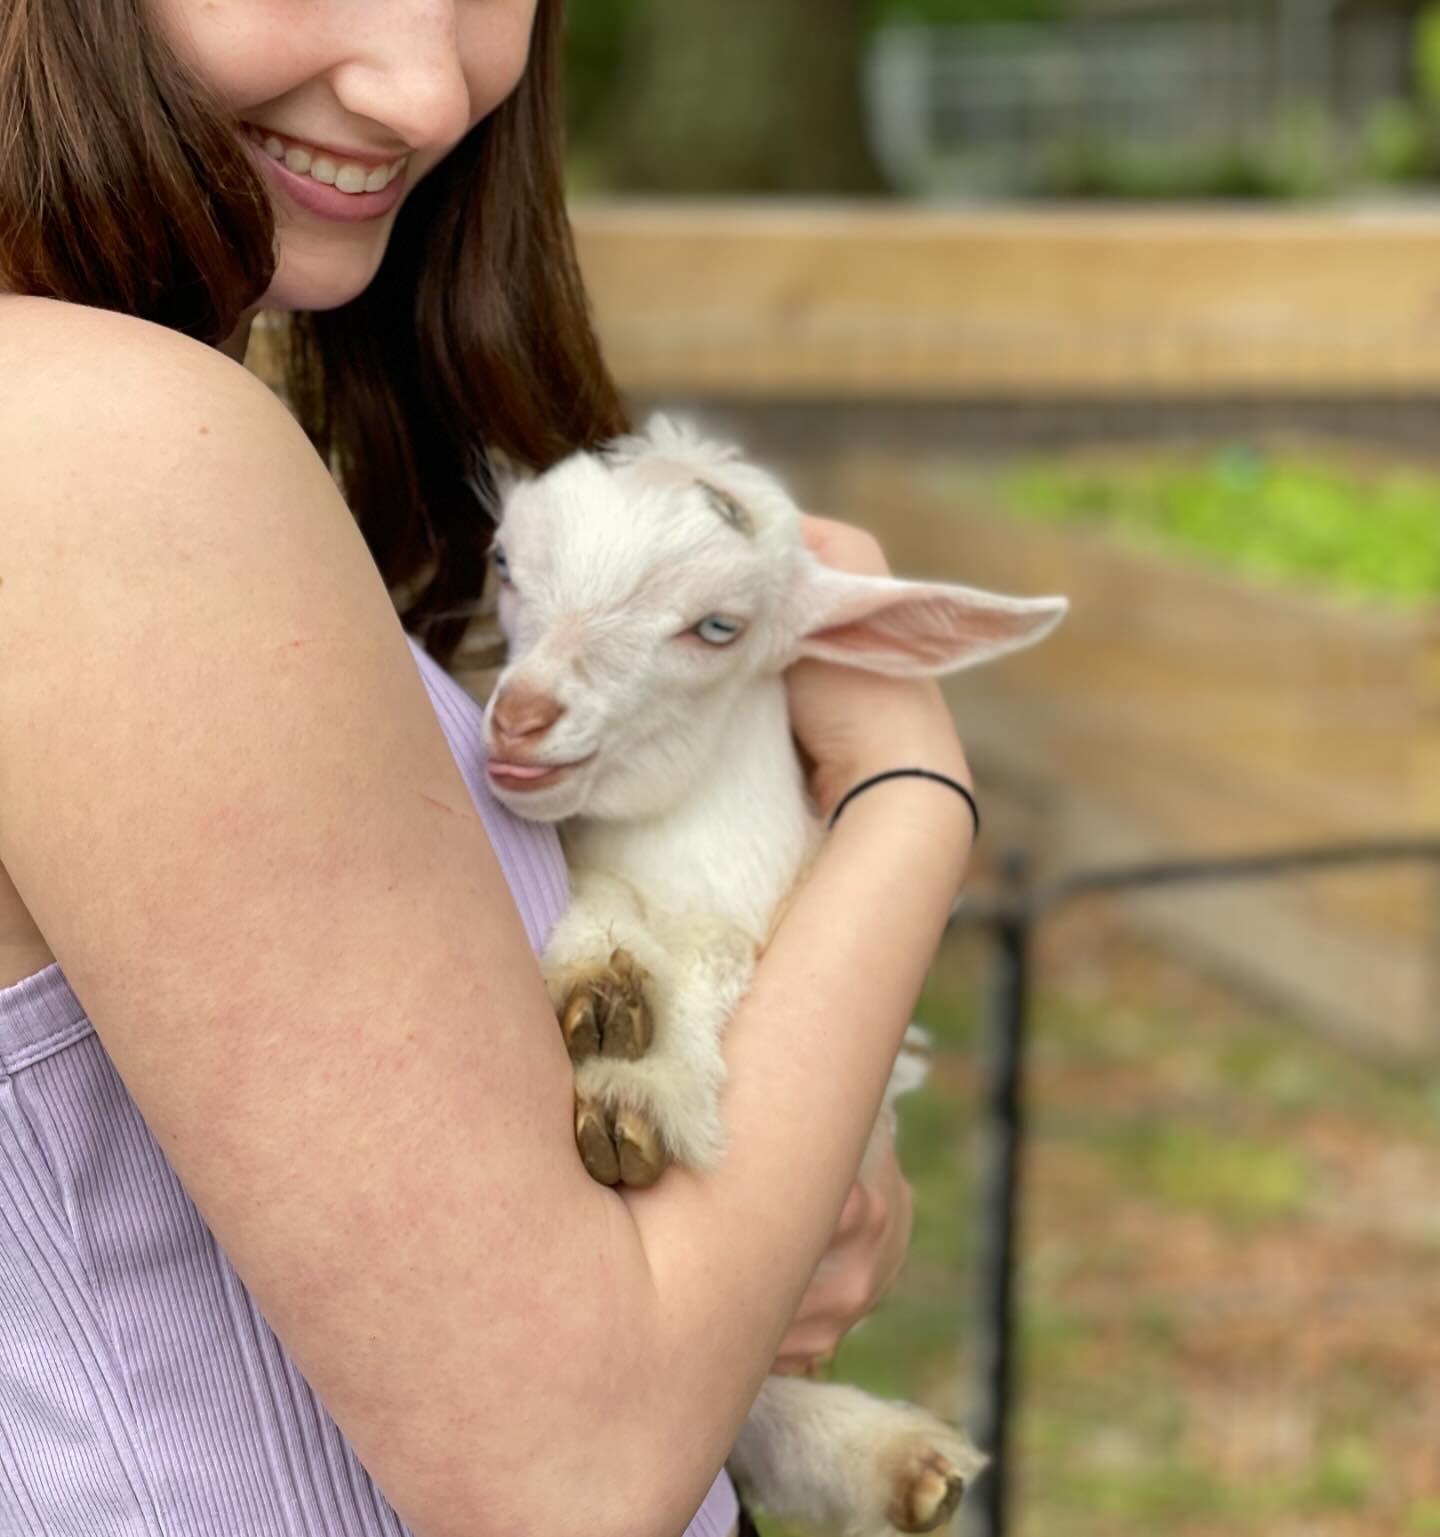 Earth day adventures 🤩 see y&rsquo;all next month at the homestead!

@thehomesteadatlittlecreek #goatyoga